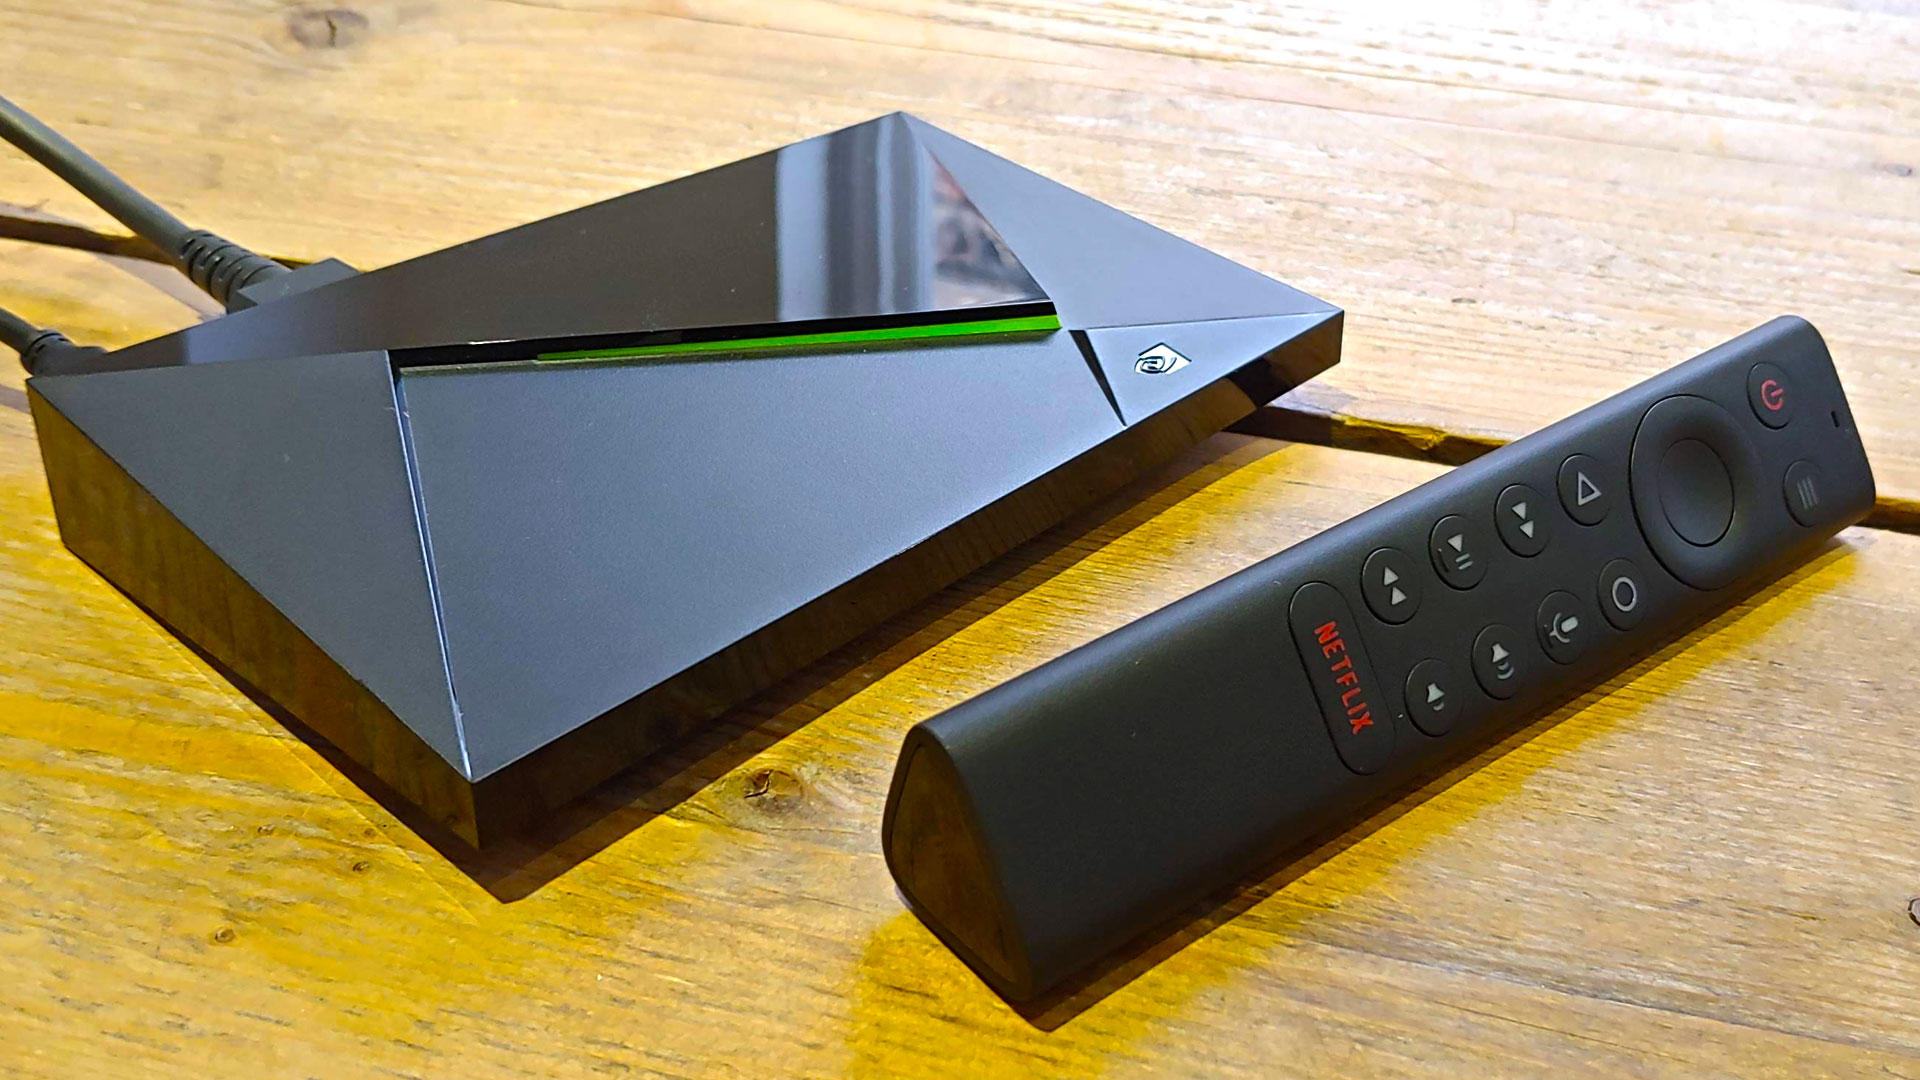 Nvidia shield tv 2019. NVIDIA Shield TV Pro 2019. NVIDIA Shield Android TV Pro.